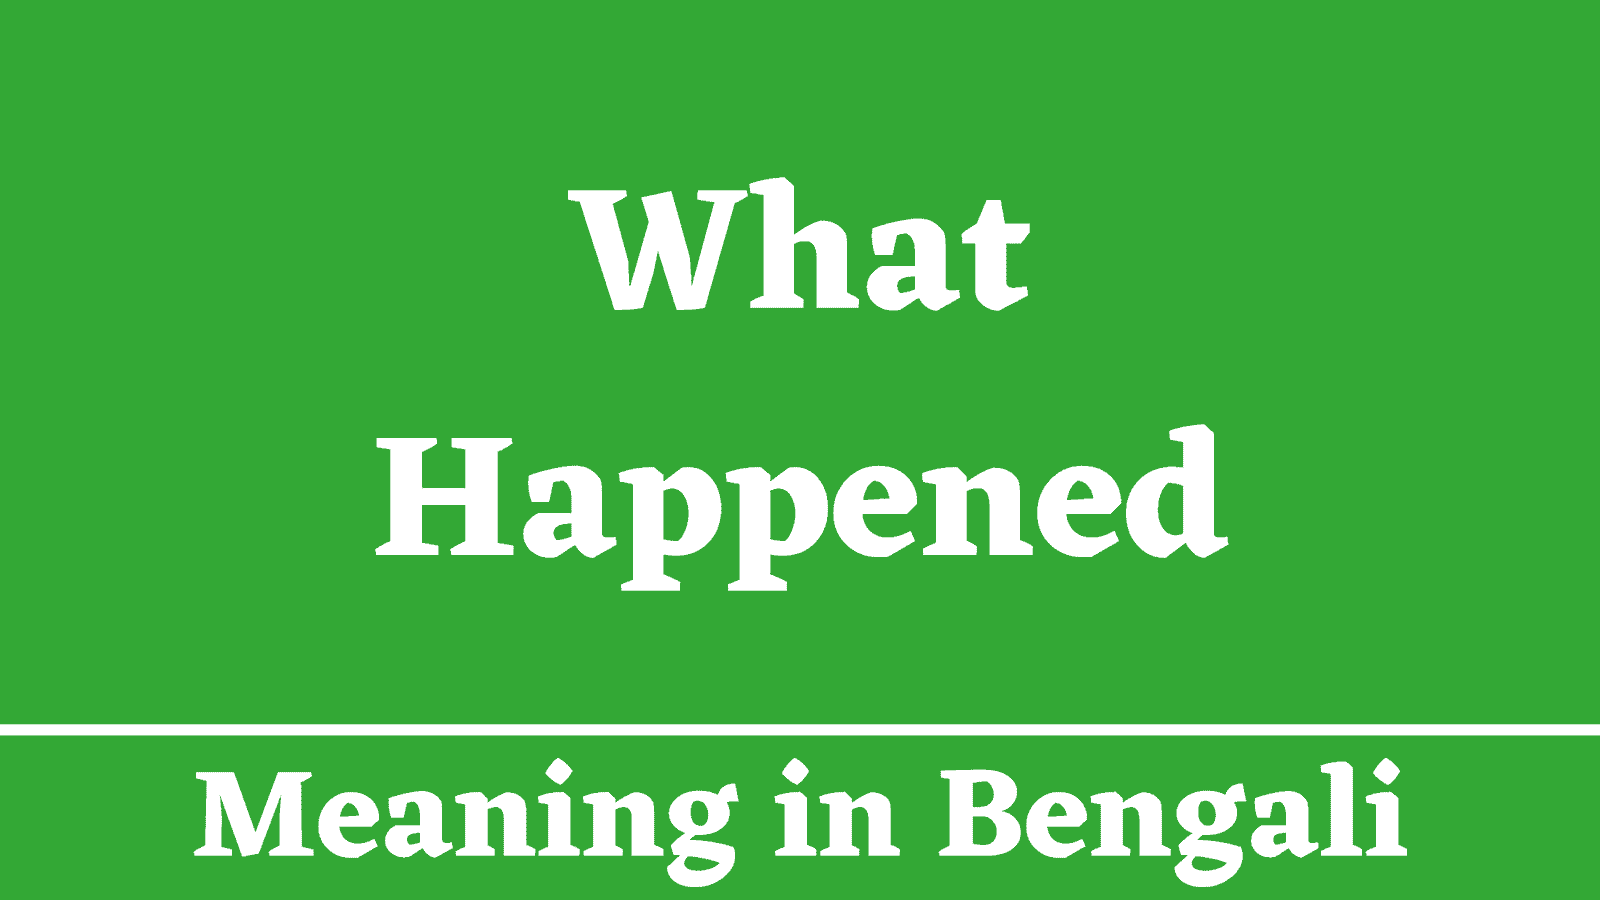 What Happened Meaning in Bengali